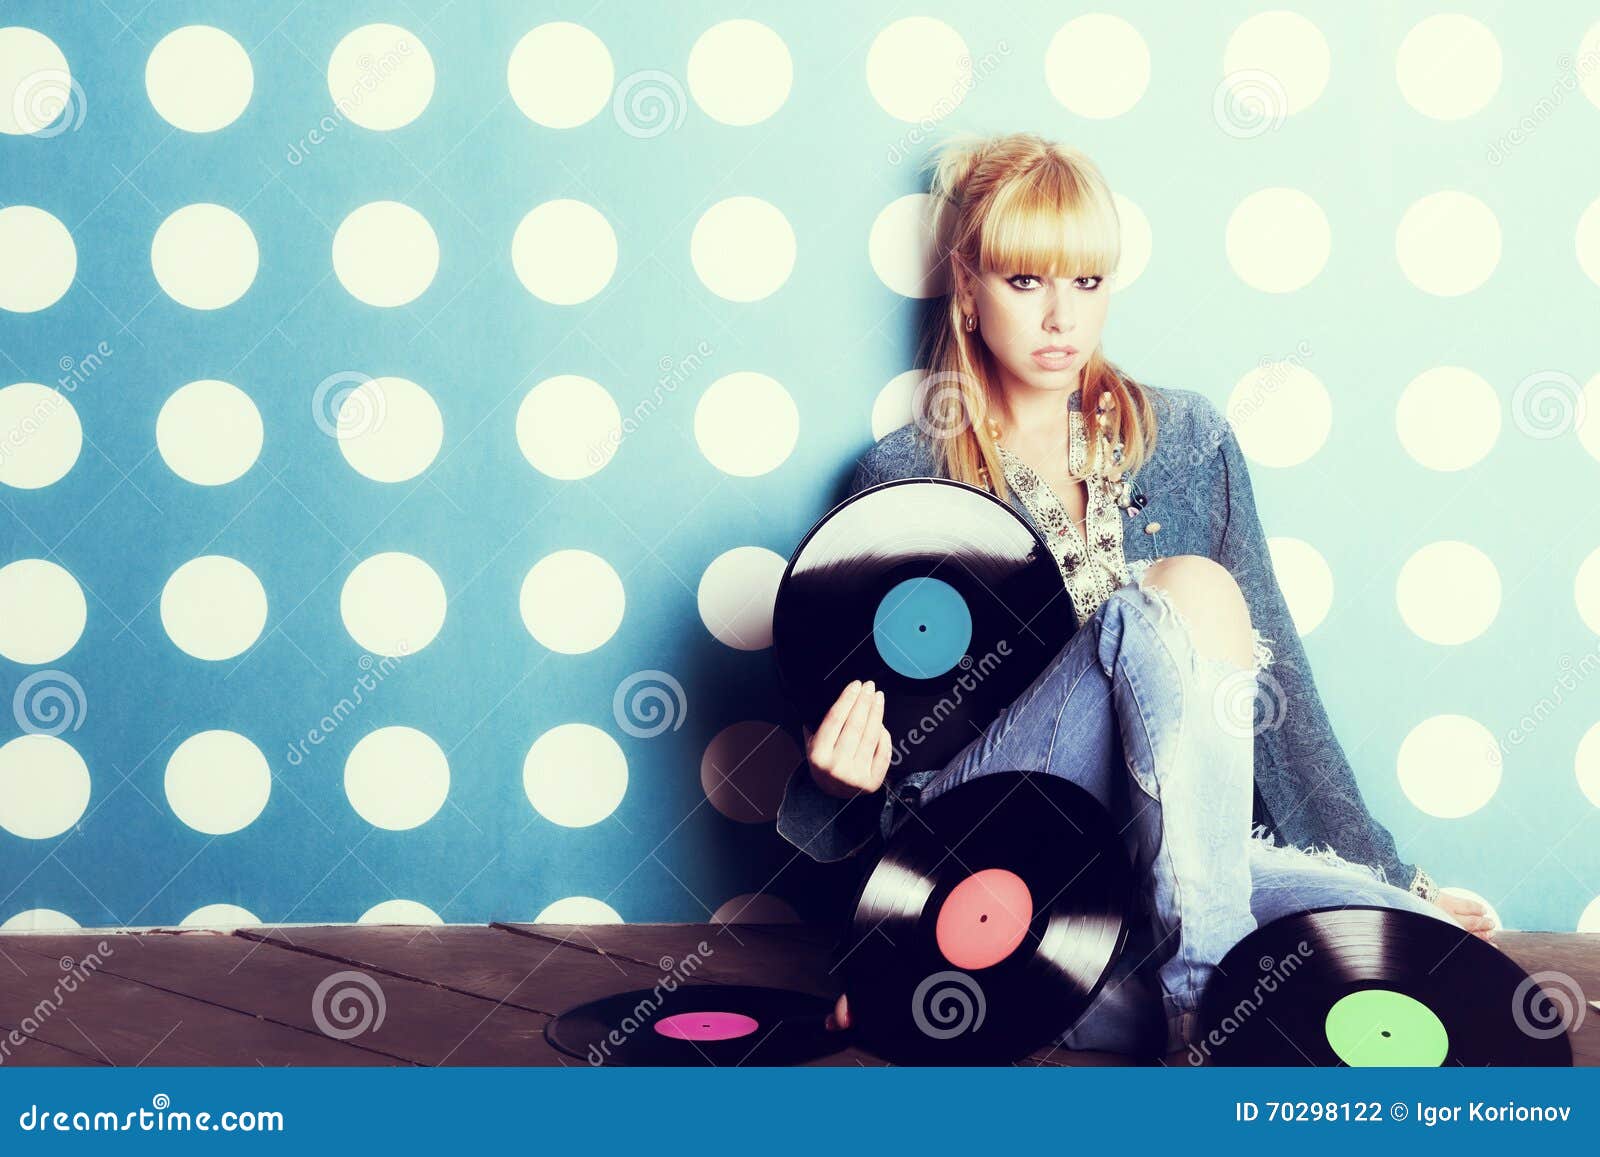 young girl with vinyl records in the hands